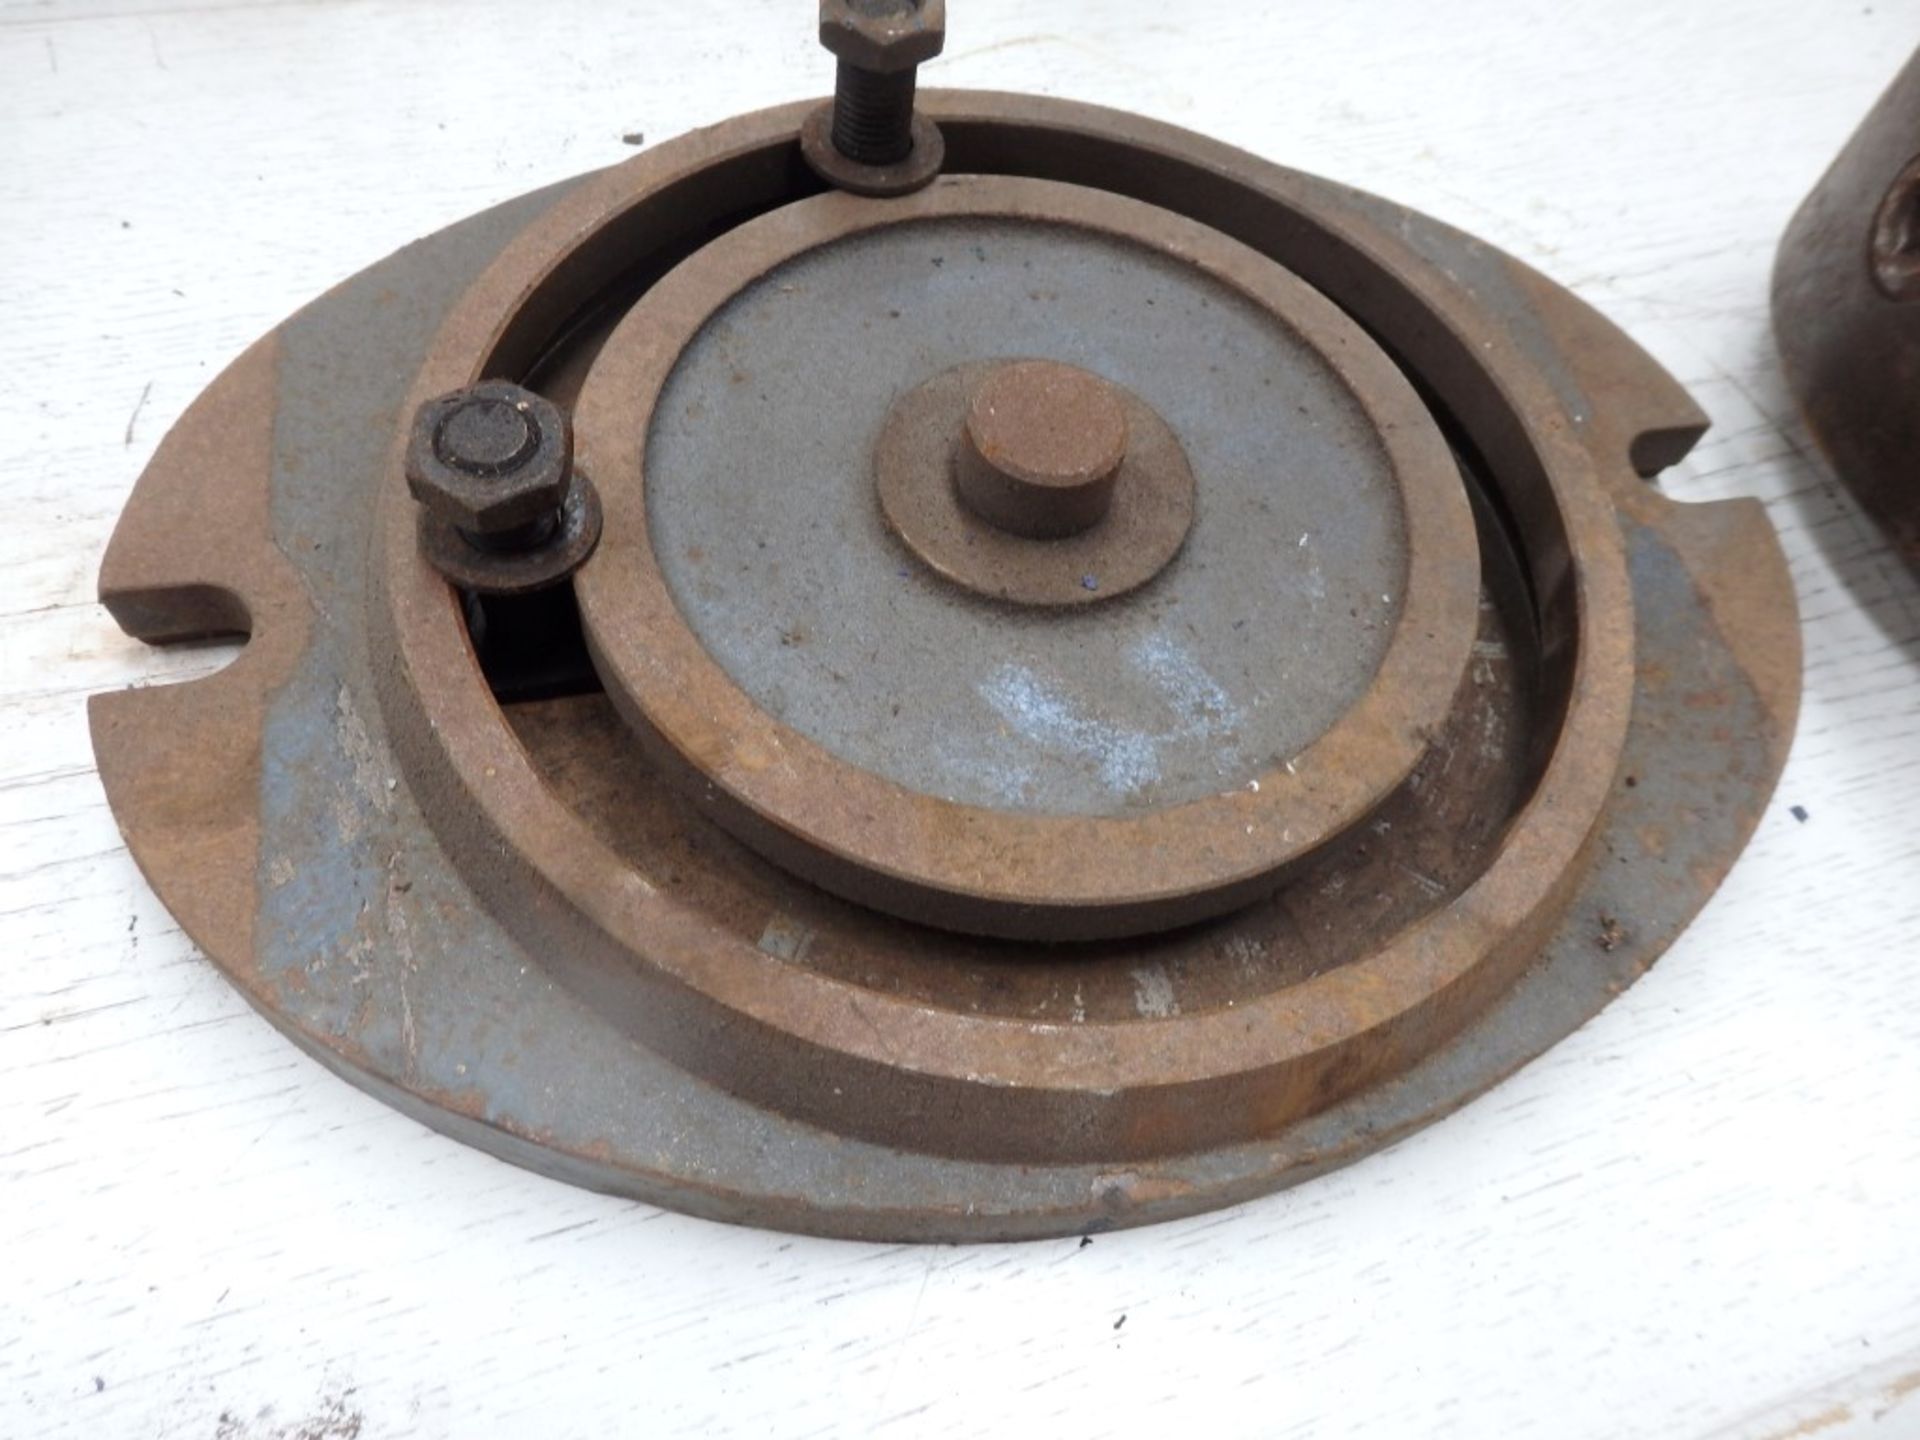 1 x Machine CHUCK - Used - Ref WPM082/591 - CL057 - Location: Welwyn, Hertfordshire, AL7  Viewings - Image 2 of 7